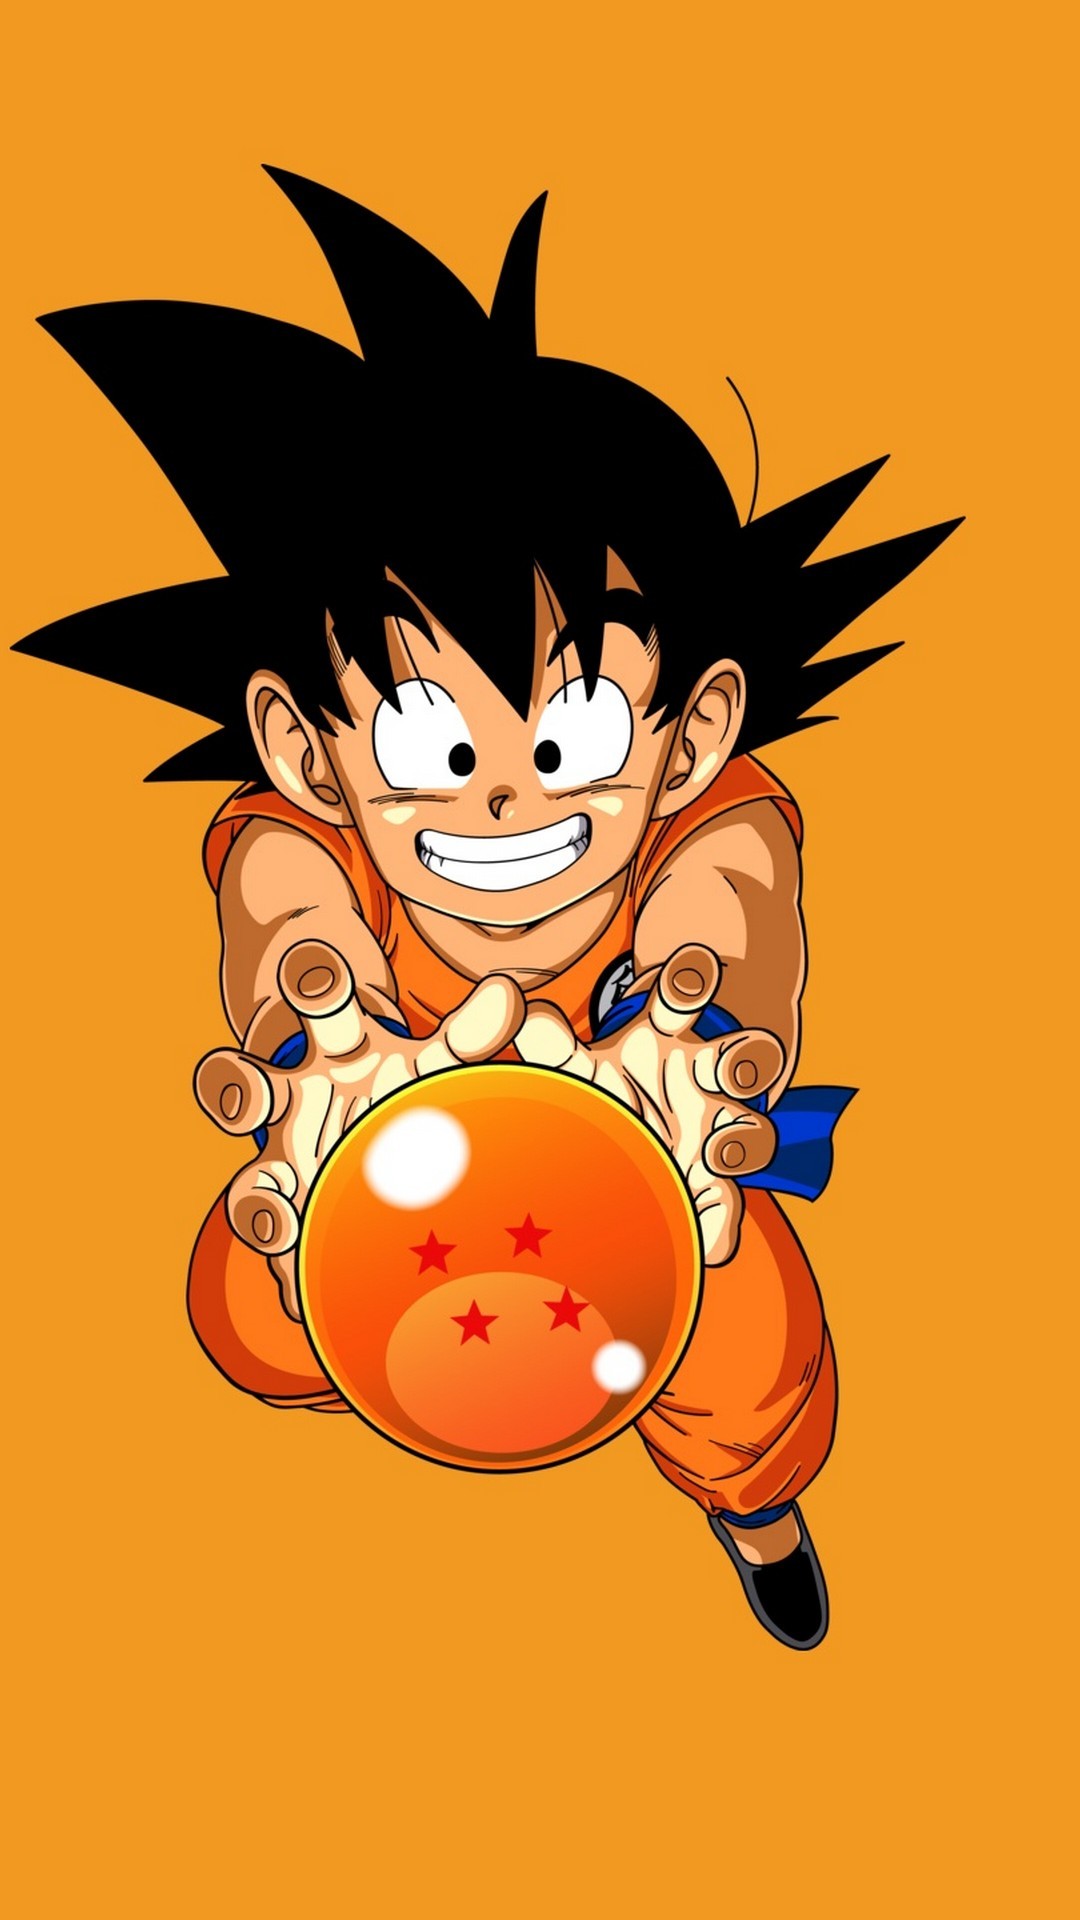 Kid Goku iPhone Wallpaper with image resolution 1080x1920 pixel. You can make this wallpaper for your iPhone 5, 6, 7, 8, X backgrounds, Mobile Screensaver, or iPad Lock Screen